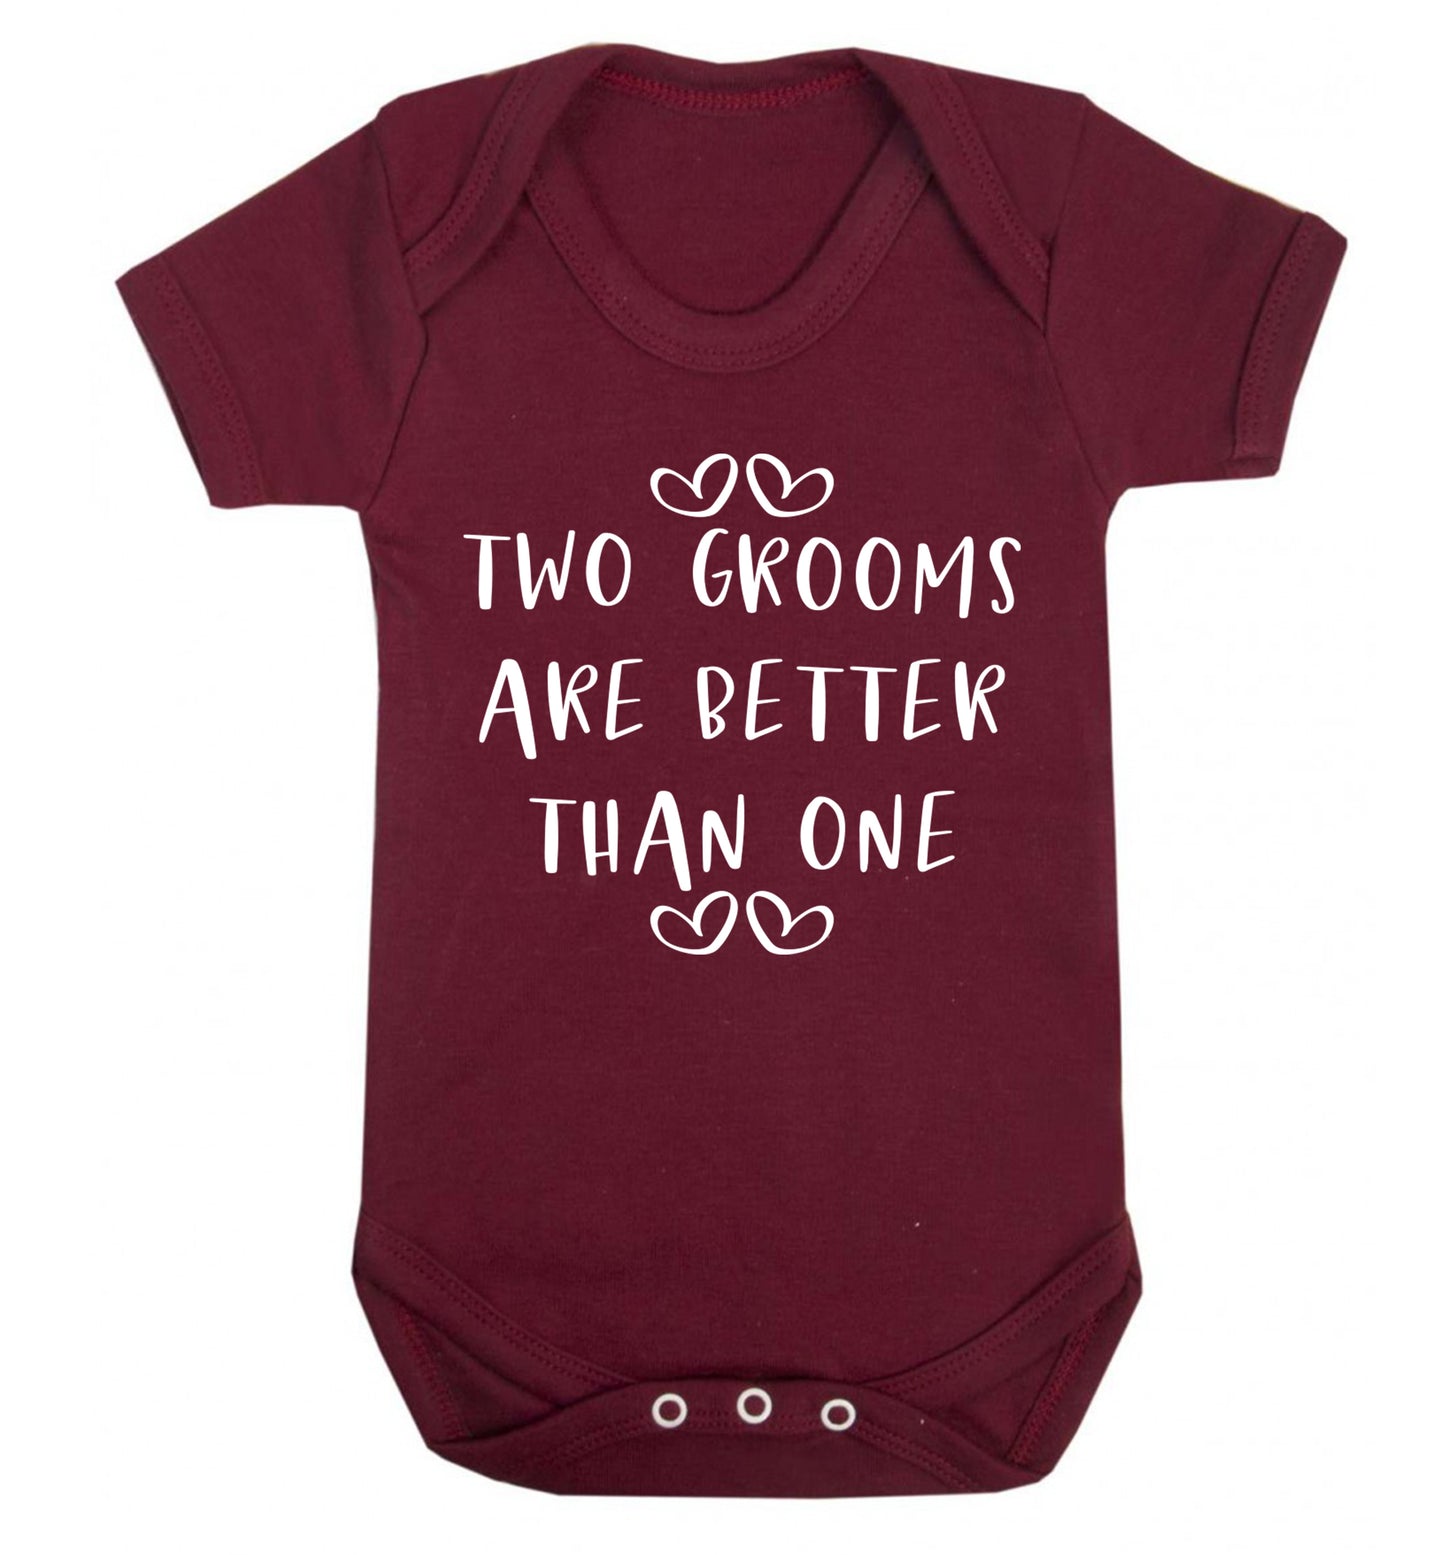 Two grooms are better than one baby vest maroon 18-24 months